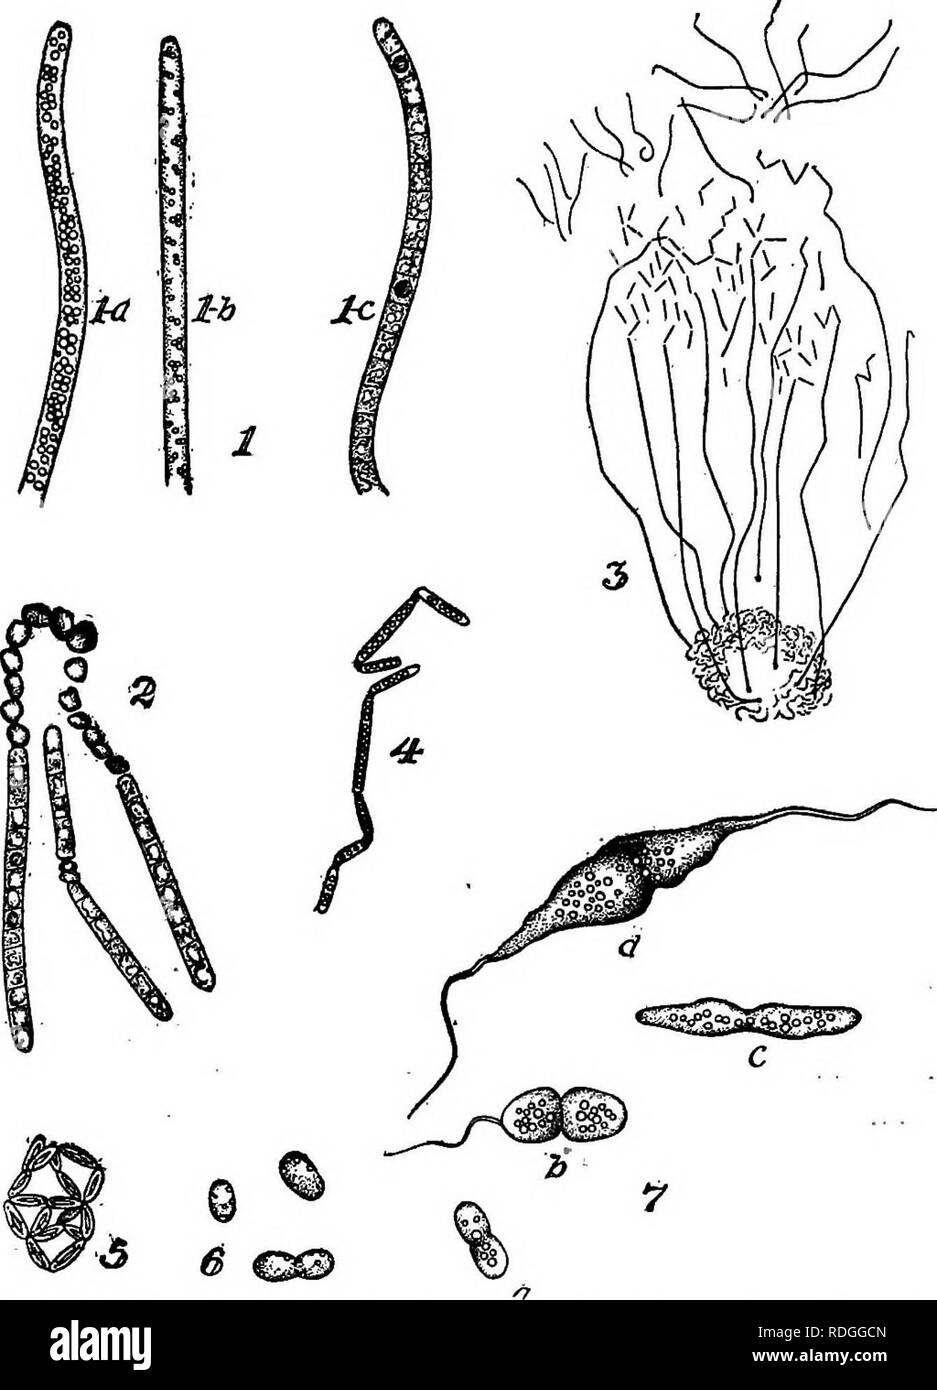 . Bacteria in relation to country life. Bacteria. Fig. 55. Sulfur bacteria.—1. Beggiatoa alba, (o) A filament rich in sulfur granules; (6' and c) Filaments showing the gradual disappearance of the sulfur; X 900. 2. Filaments dying for lack of sulfur; X 900. 3. Thiothrix tenuis; X 100. 4. Motile filament of Thiothrix tenuis; X 900. 5. Thio- dictyon elegans; X 900. 6. Thiothece gelaiinosa; X 900. 7. (a) Chromatium Weissii; (b) Chromatium Okfmii; (c) Rhabdochromatium roseum; (d) Rhab' dochromatium fusiforme; X 900. (All after Winogradski.). Please note that these images are extracted from scanned Stock Photo